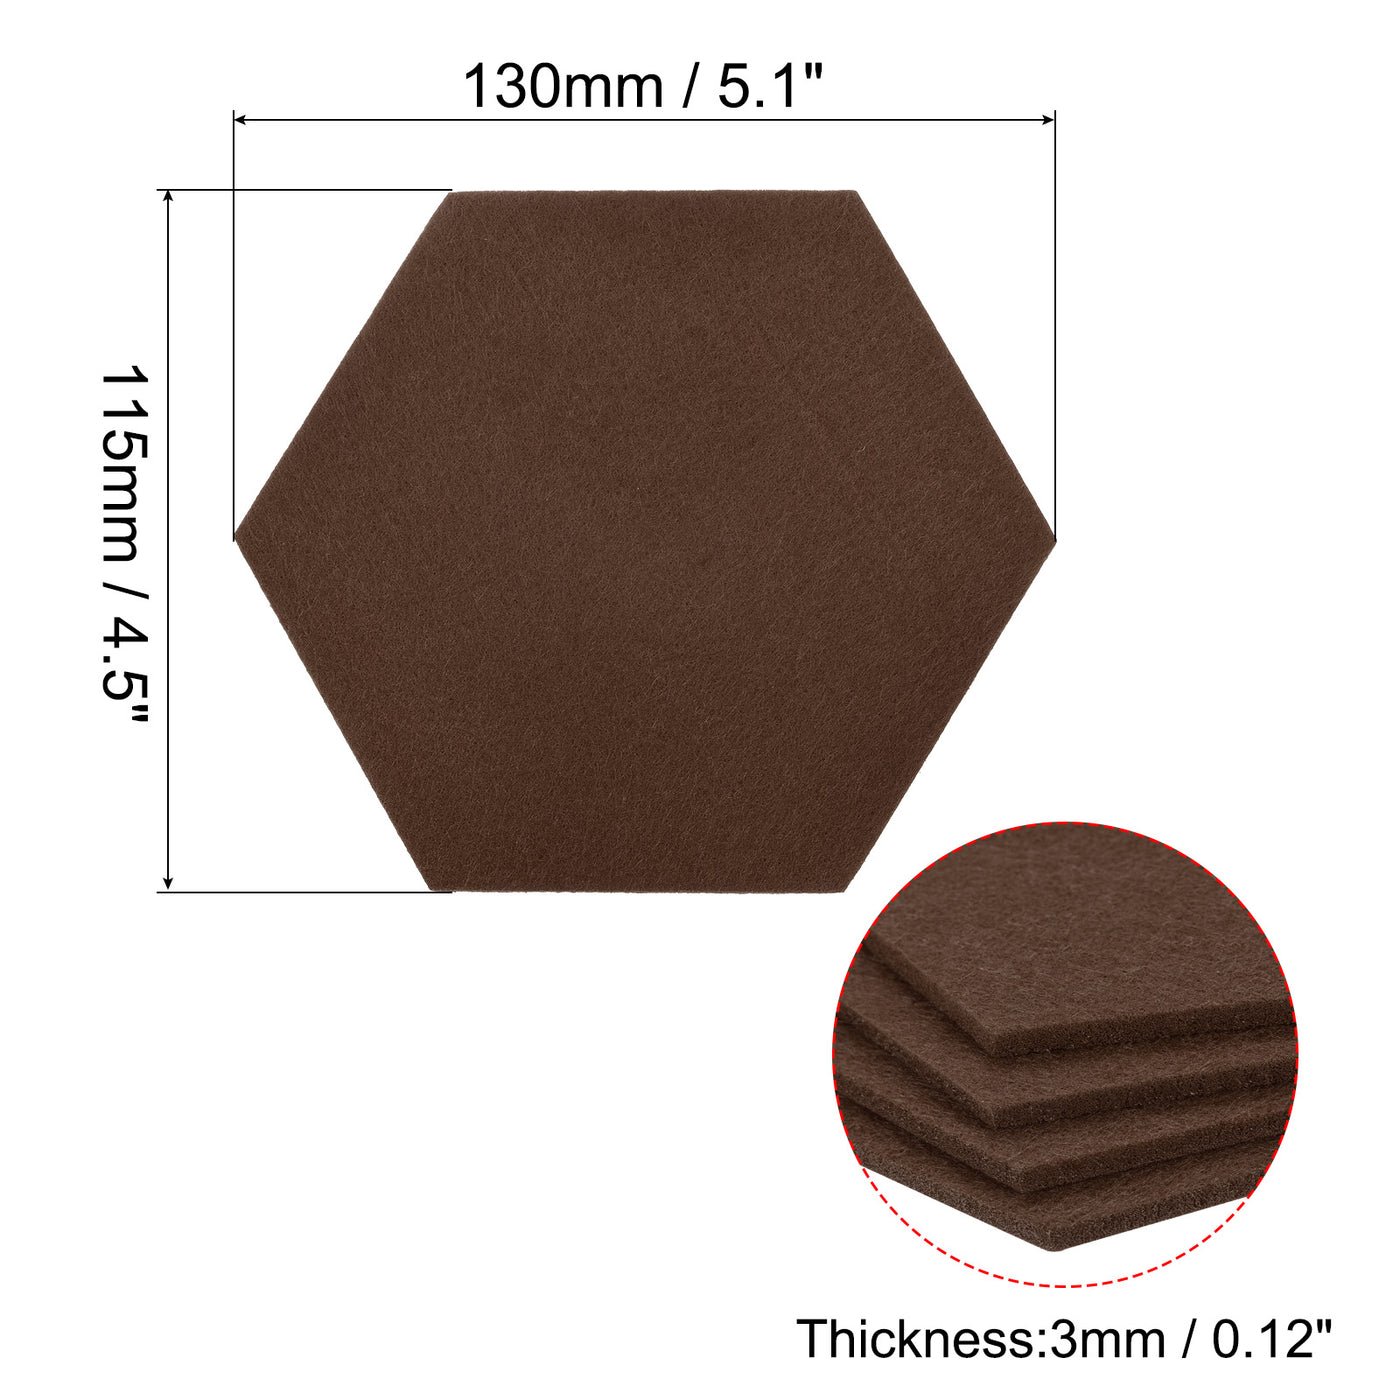 uxcell Uxcell Felt Coasters 9pcs Absorbent Pad Coaster for Drink Cup Pot Bowl Vase Coffee